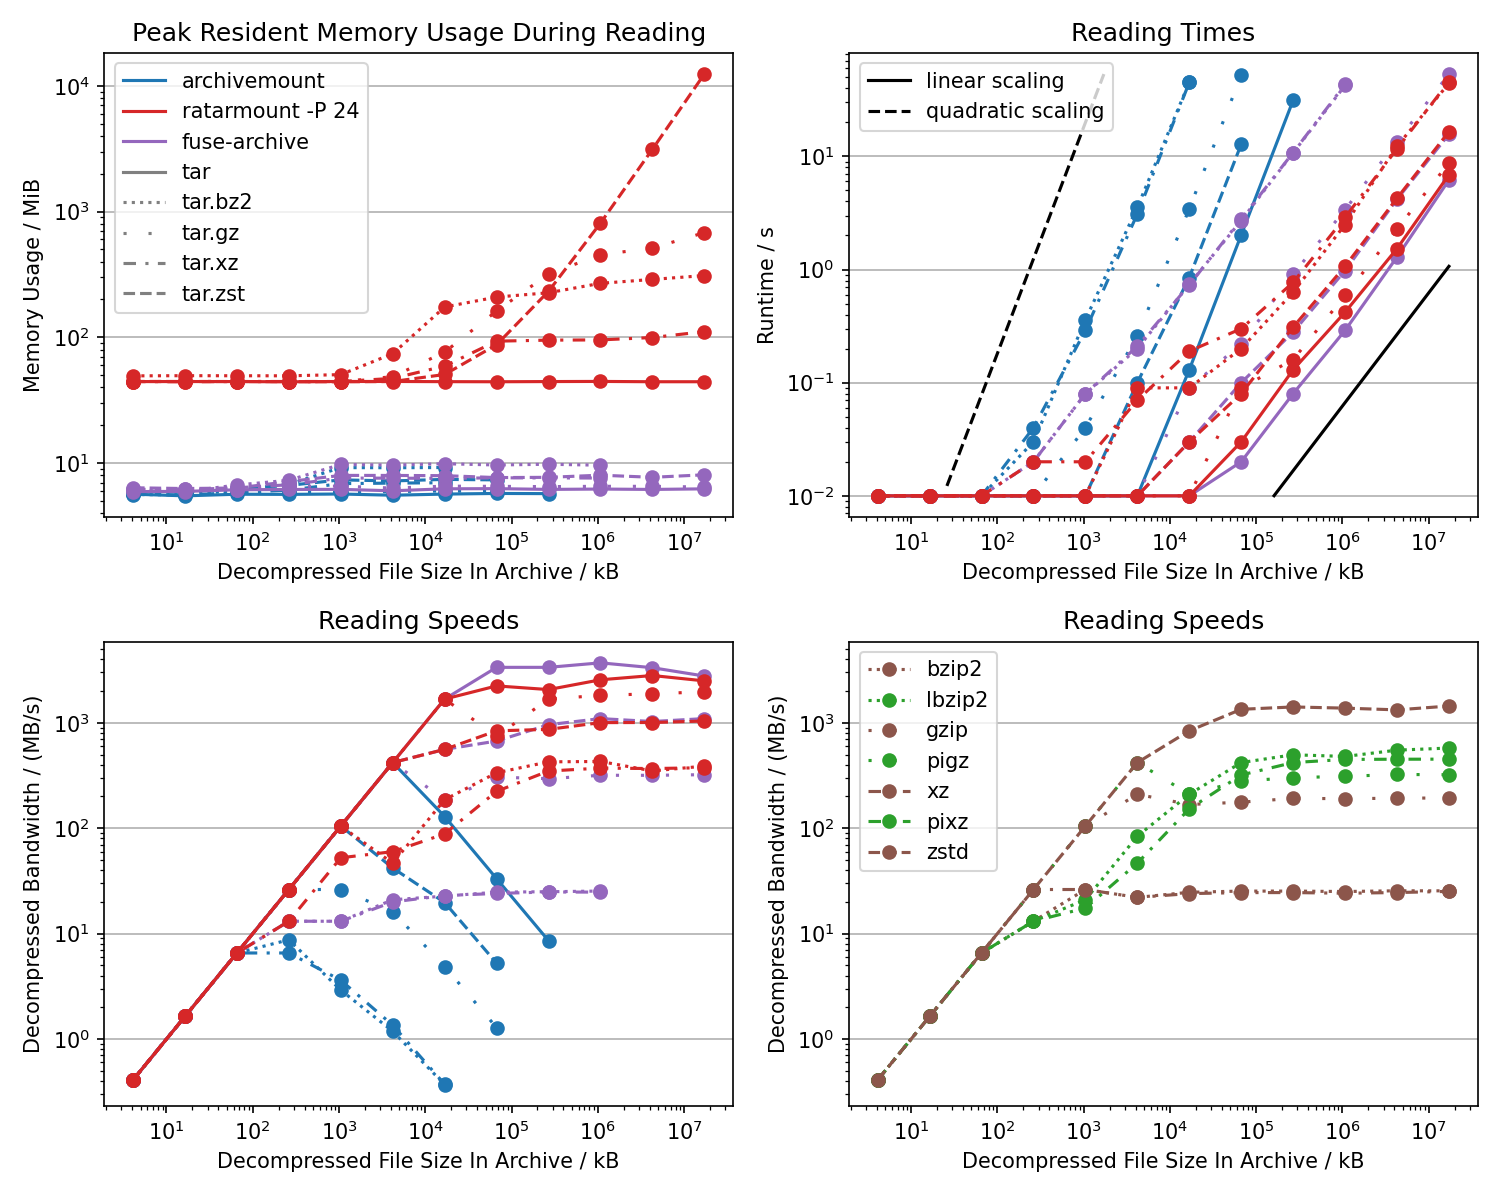 Reading bandwidth benchmark comparison between ratarmount, archivemount, and fuse-archive